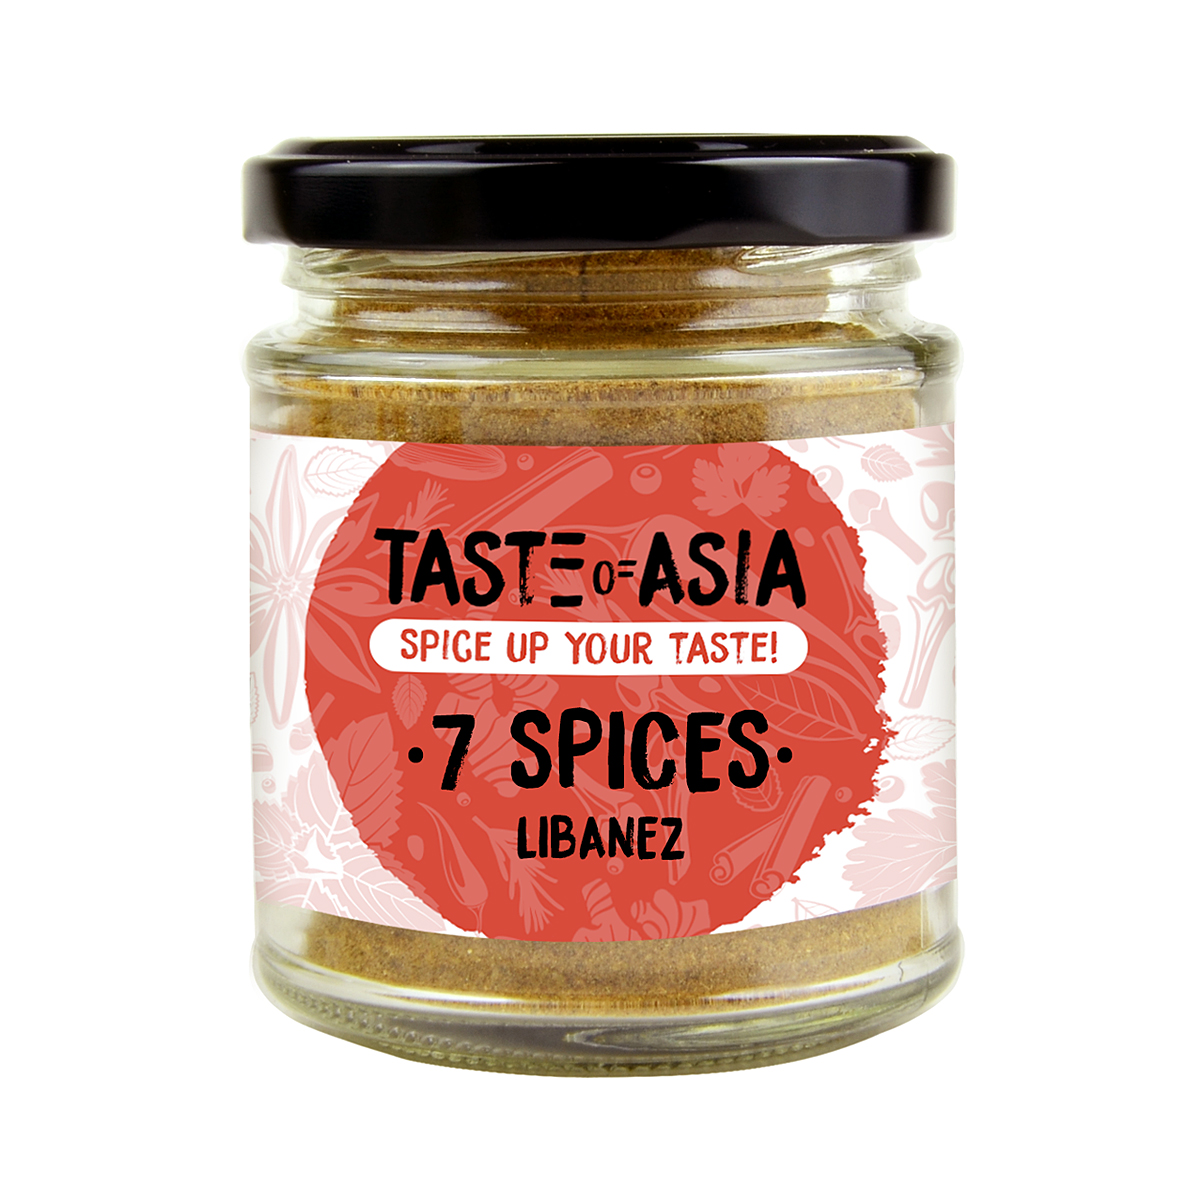 Private Label Taste of Asia - 7 Spices Libanez TOA 70g, asianfood.ro